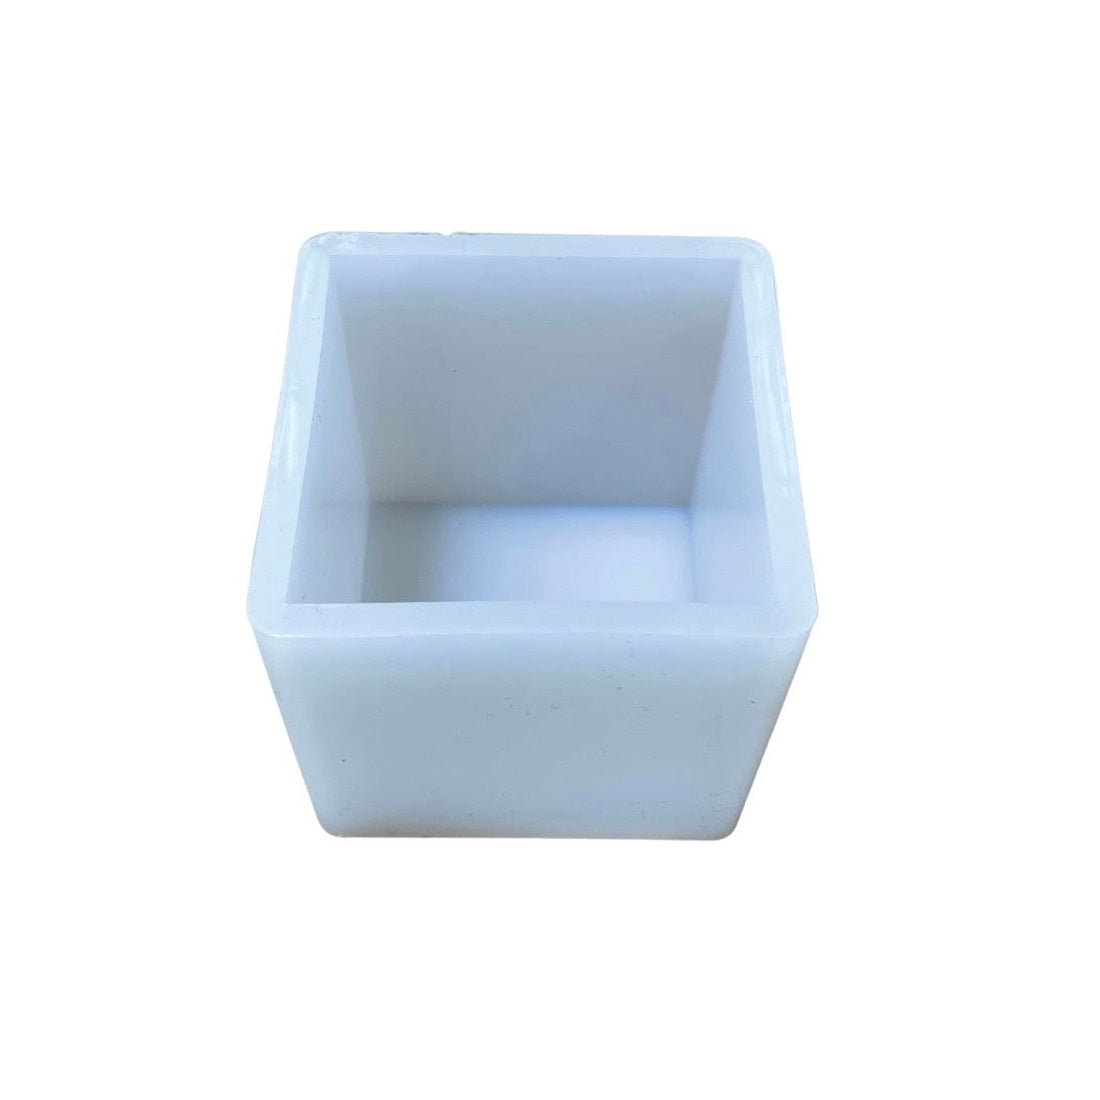 2.5x 2.5x 2.5 Deep Shiny Cube Silicone Mold For Epoxy Resin